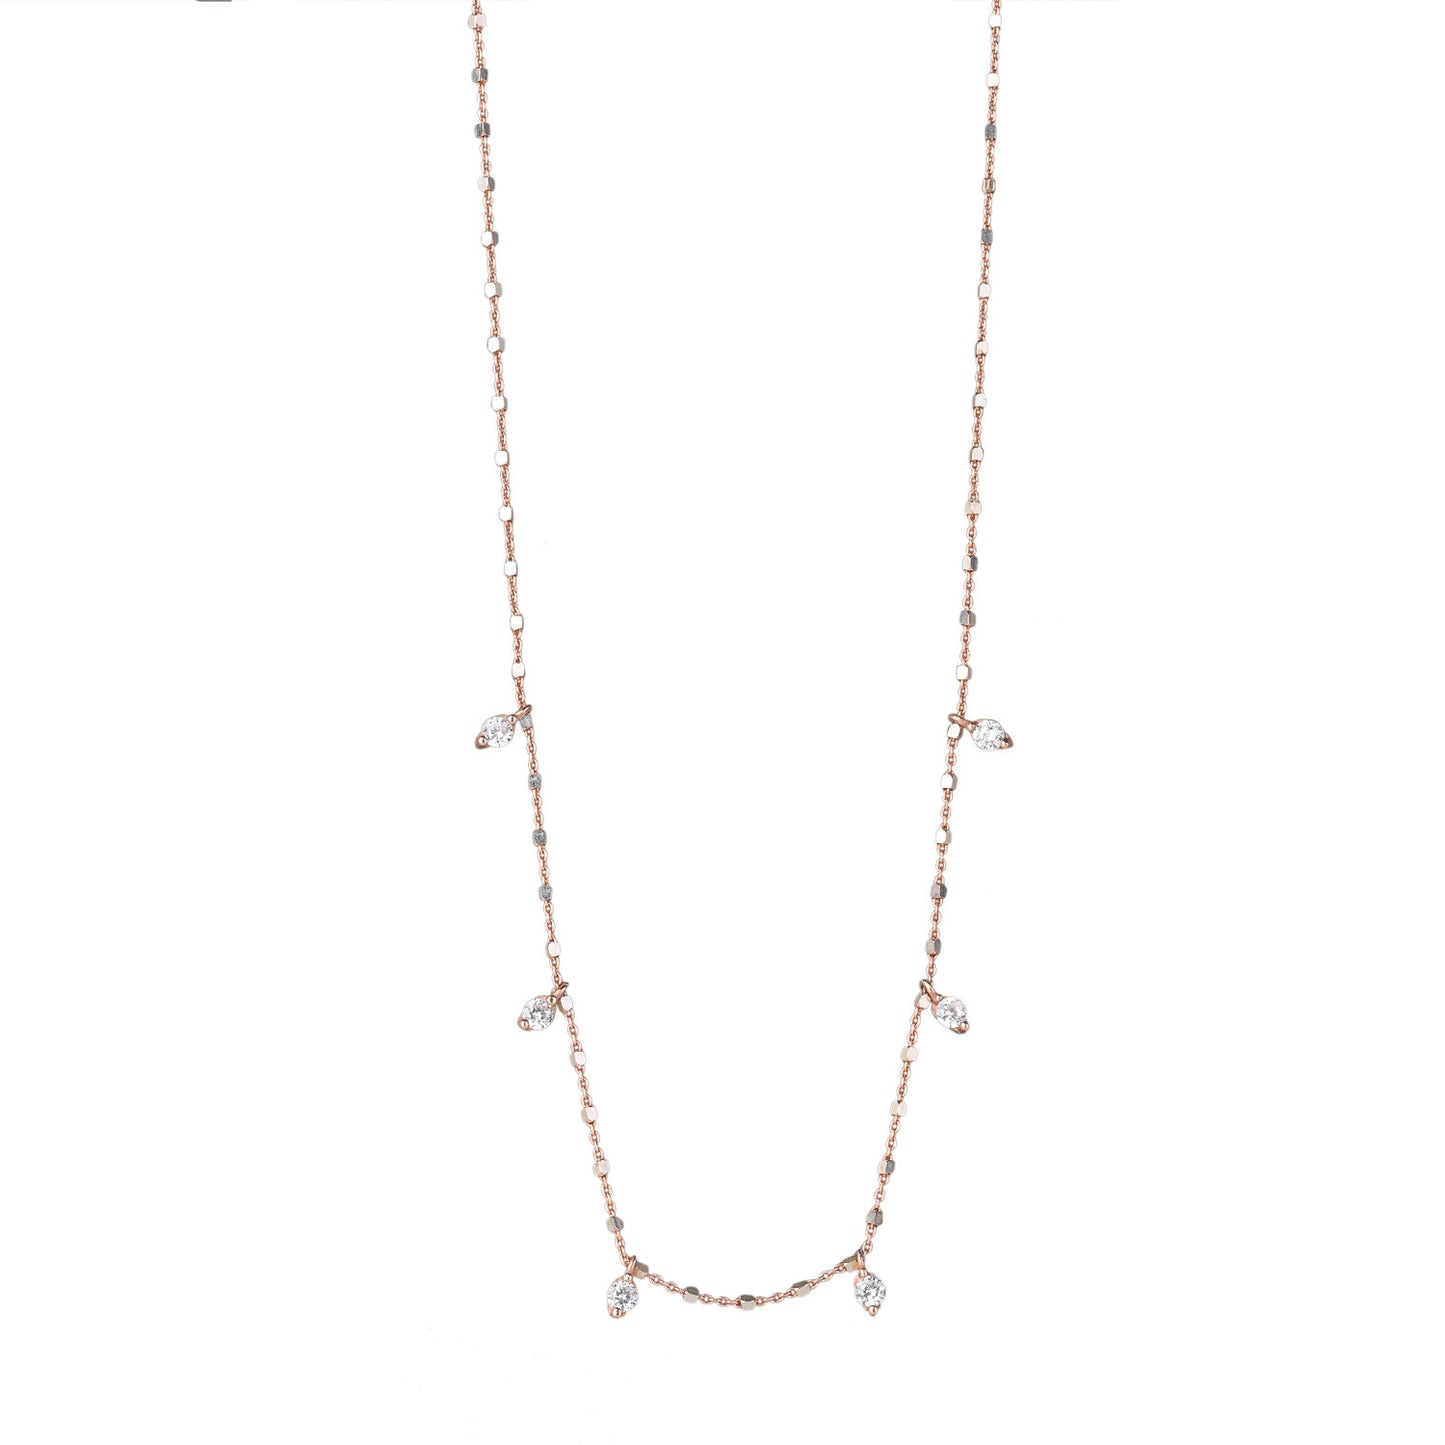 Necklace with charms stones - Pink Gold plated